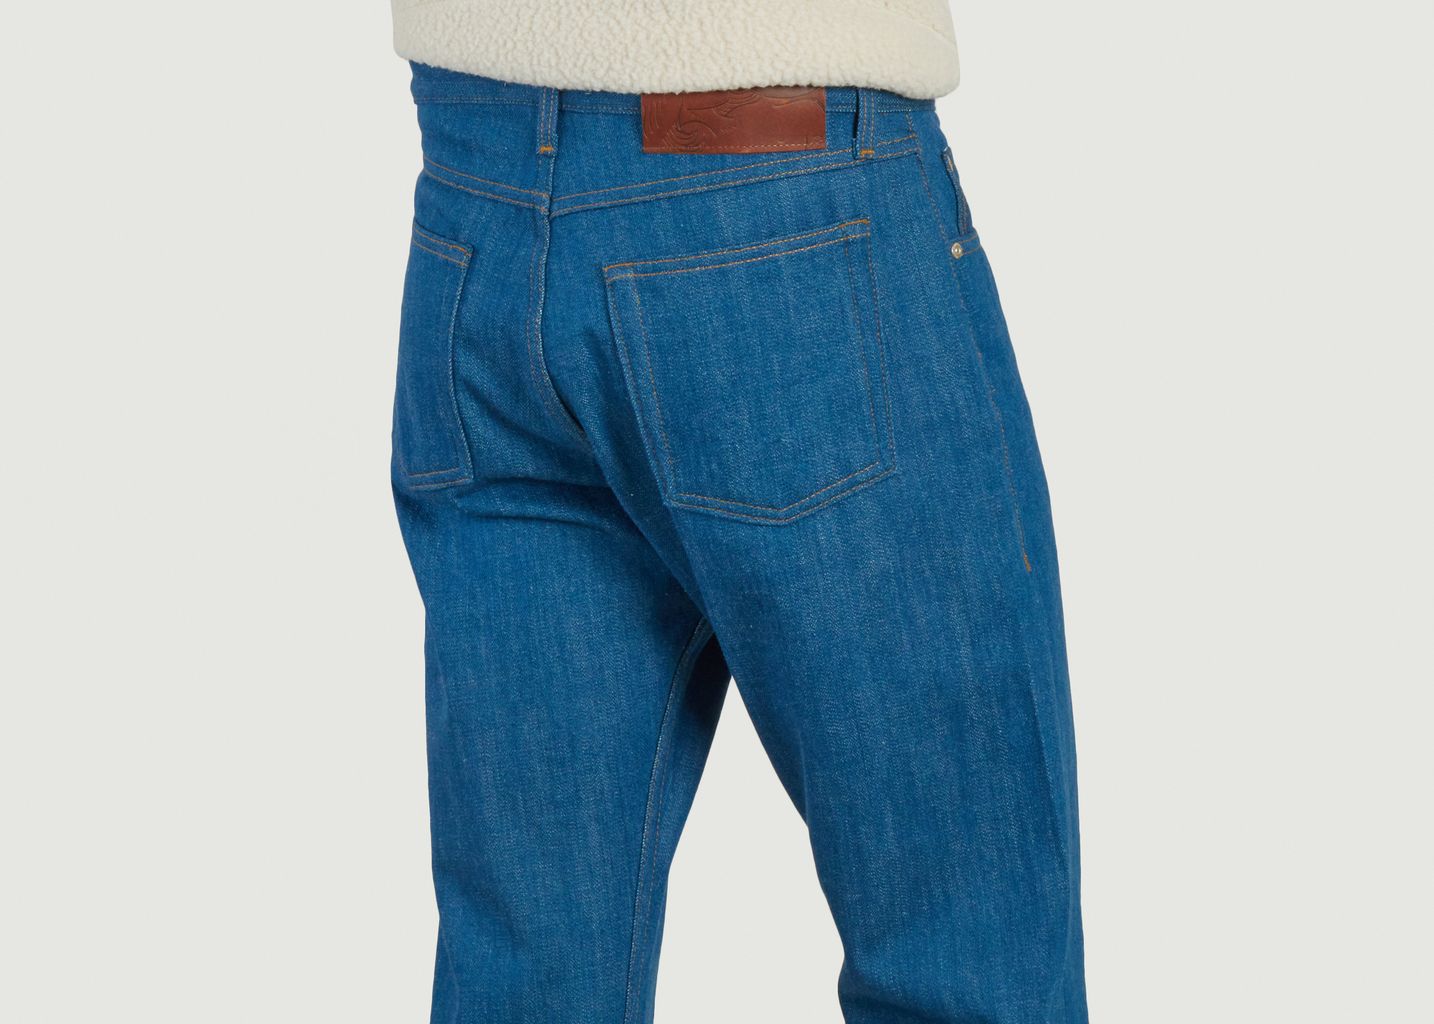 Jeans True Guy Oceans Edge Selvedge - Naked and Famous